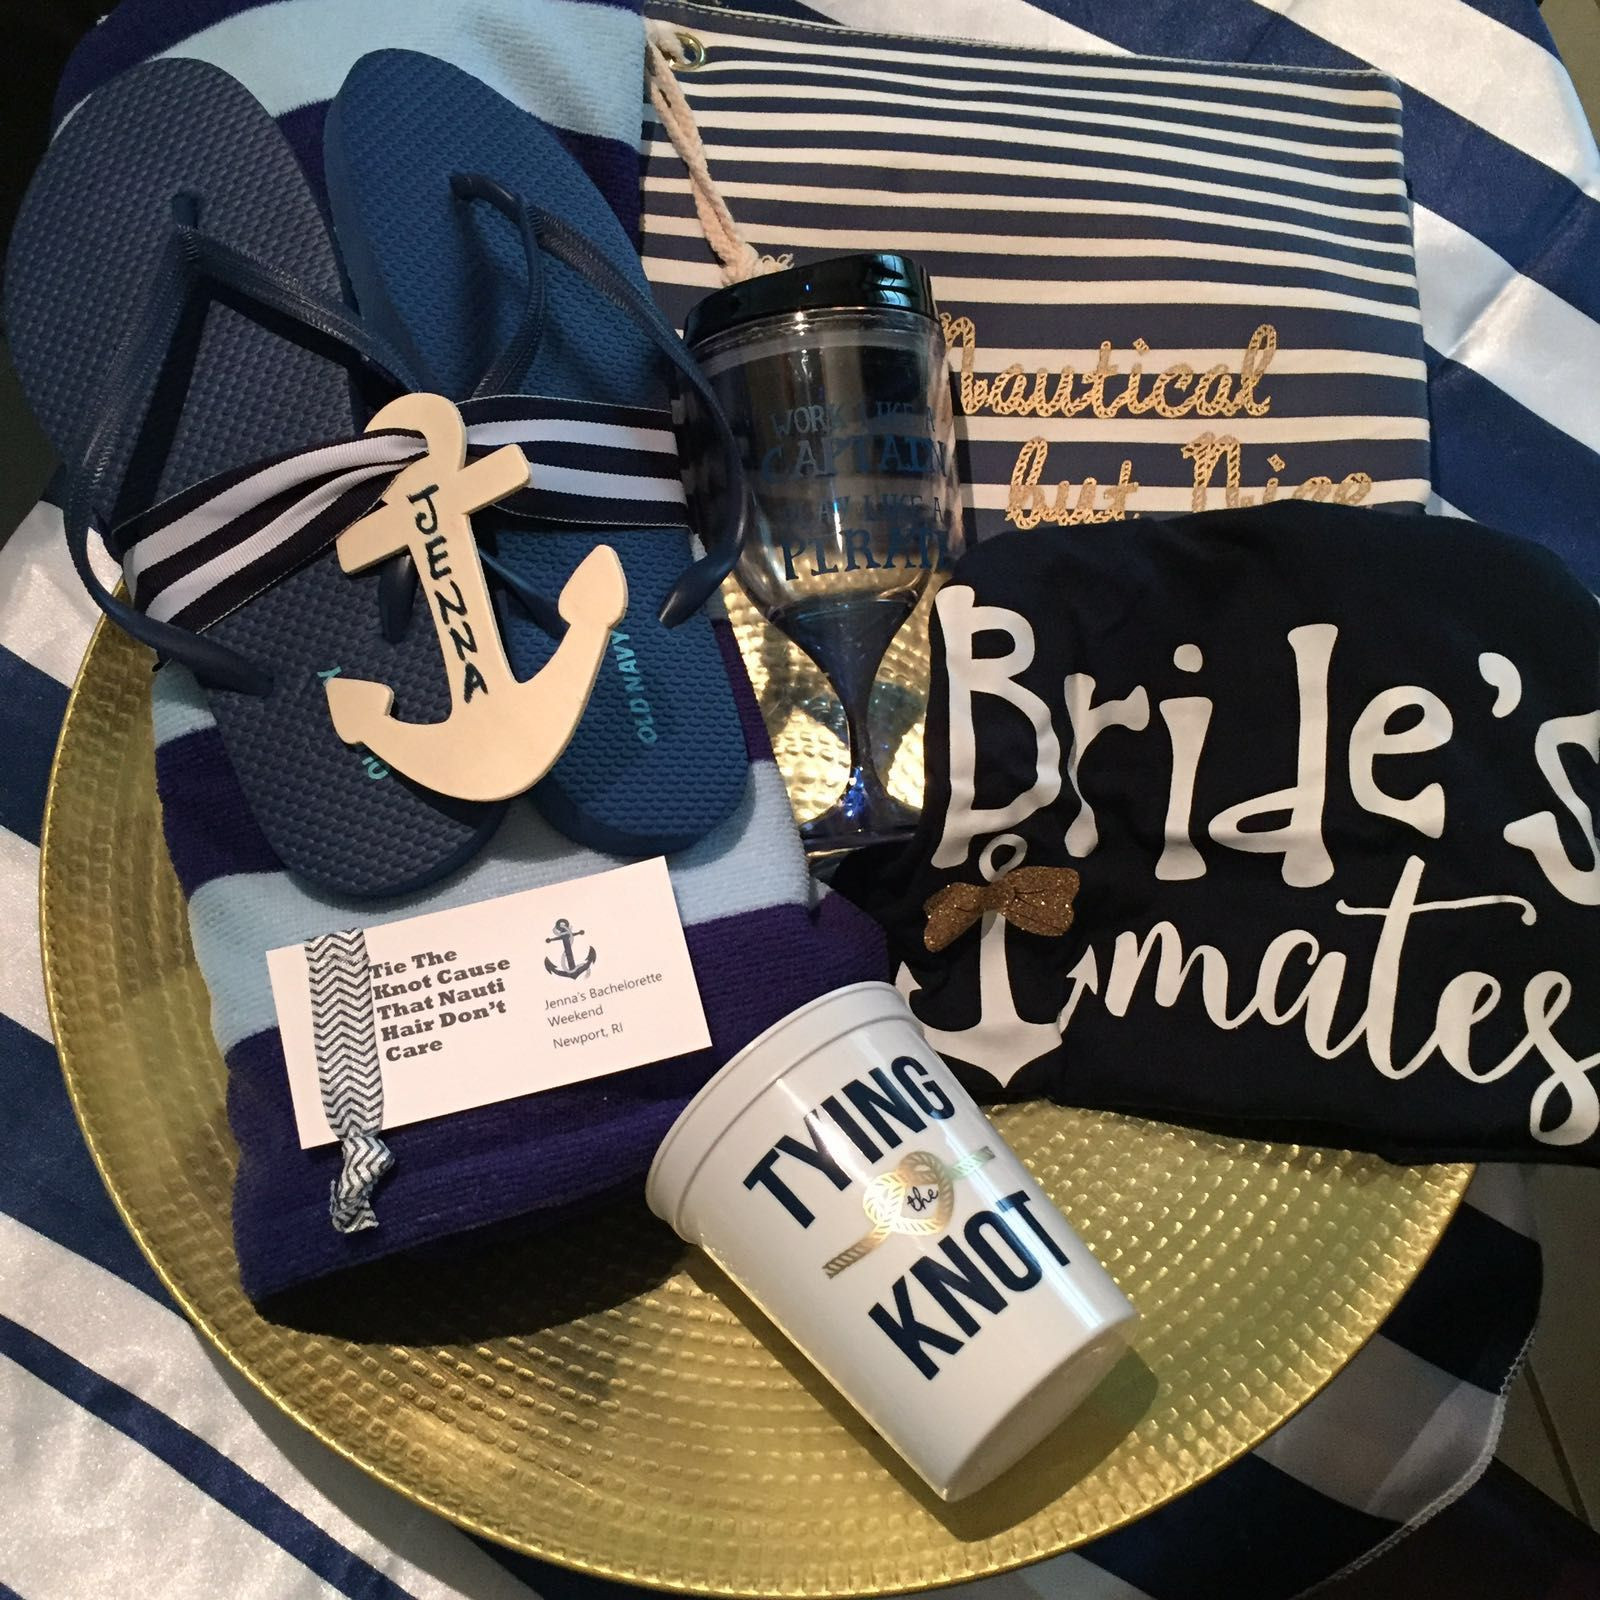 Cruise Bachelorette Party Ideas
 Nautical Bachelorette Party Gifts for all the bridesmaids